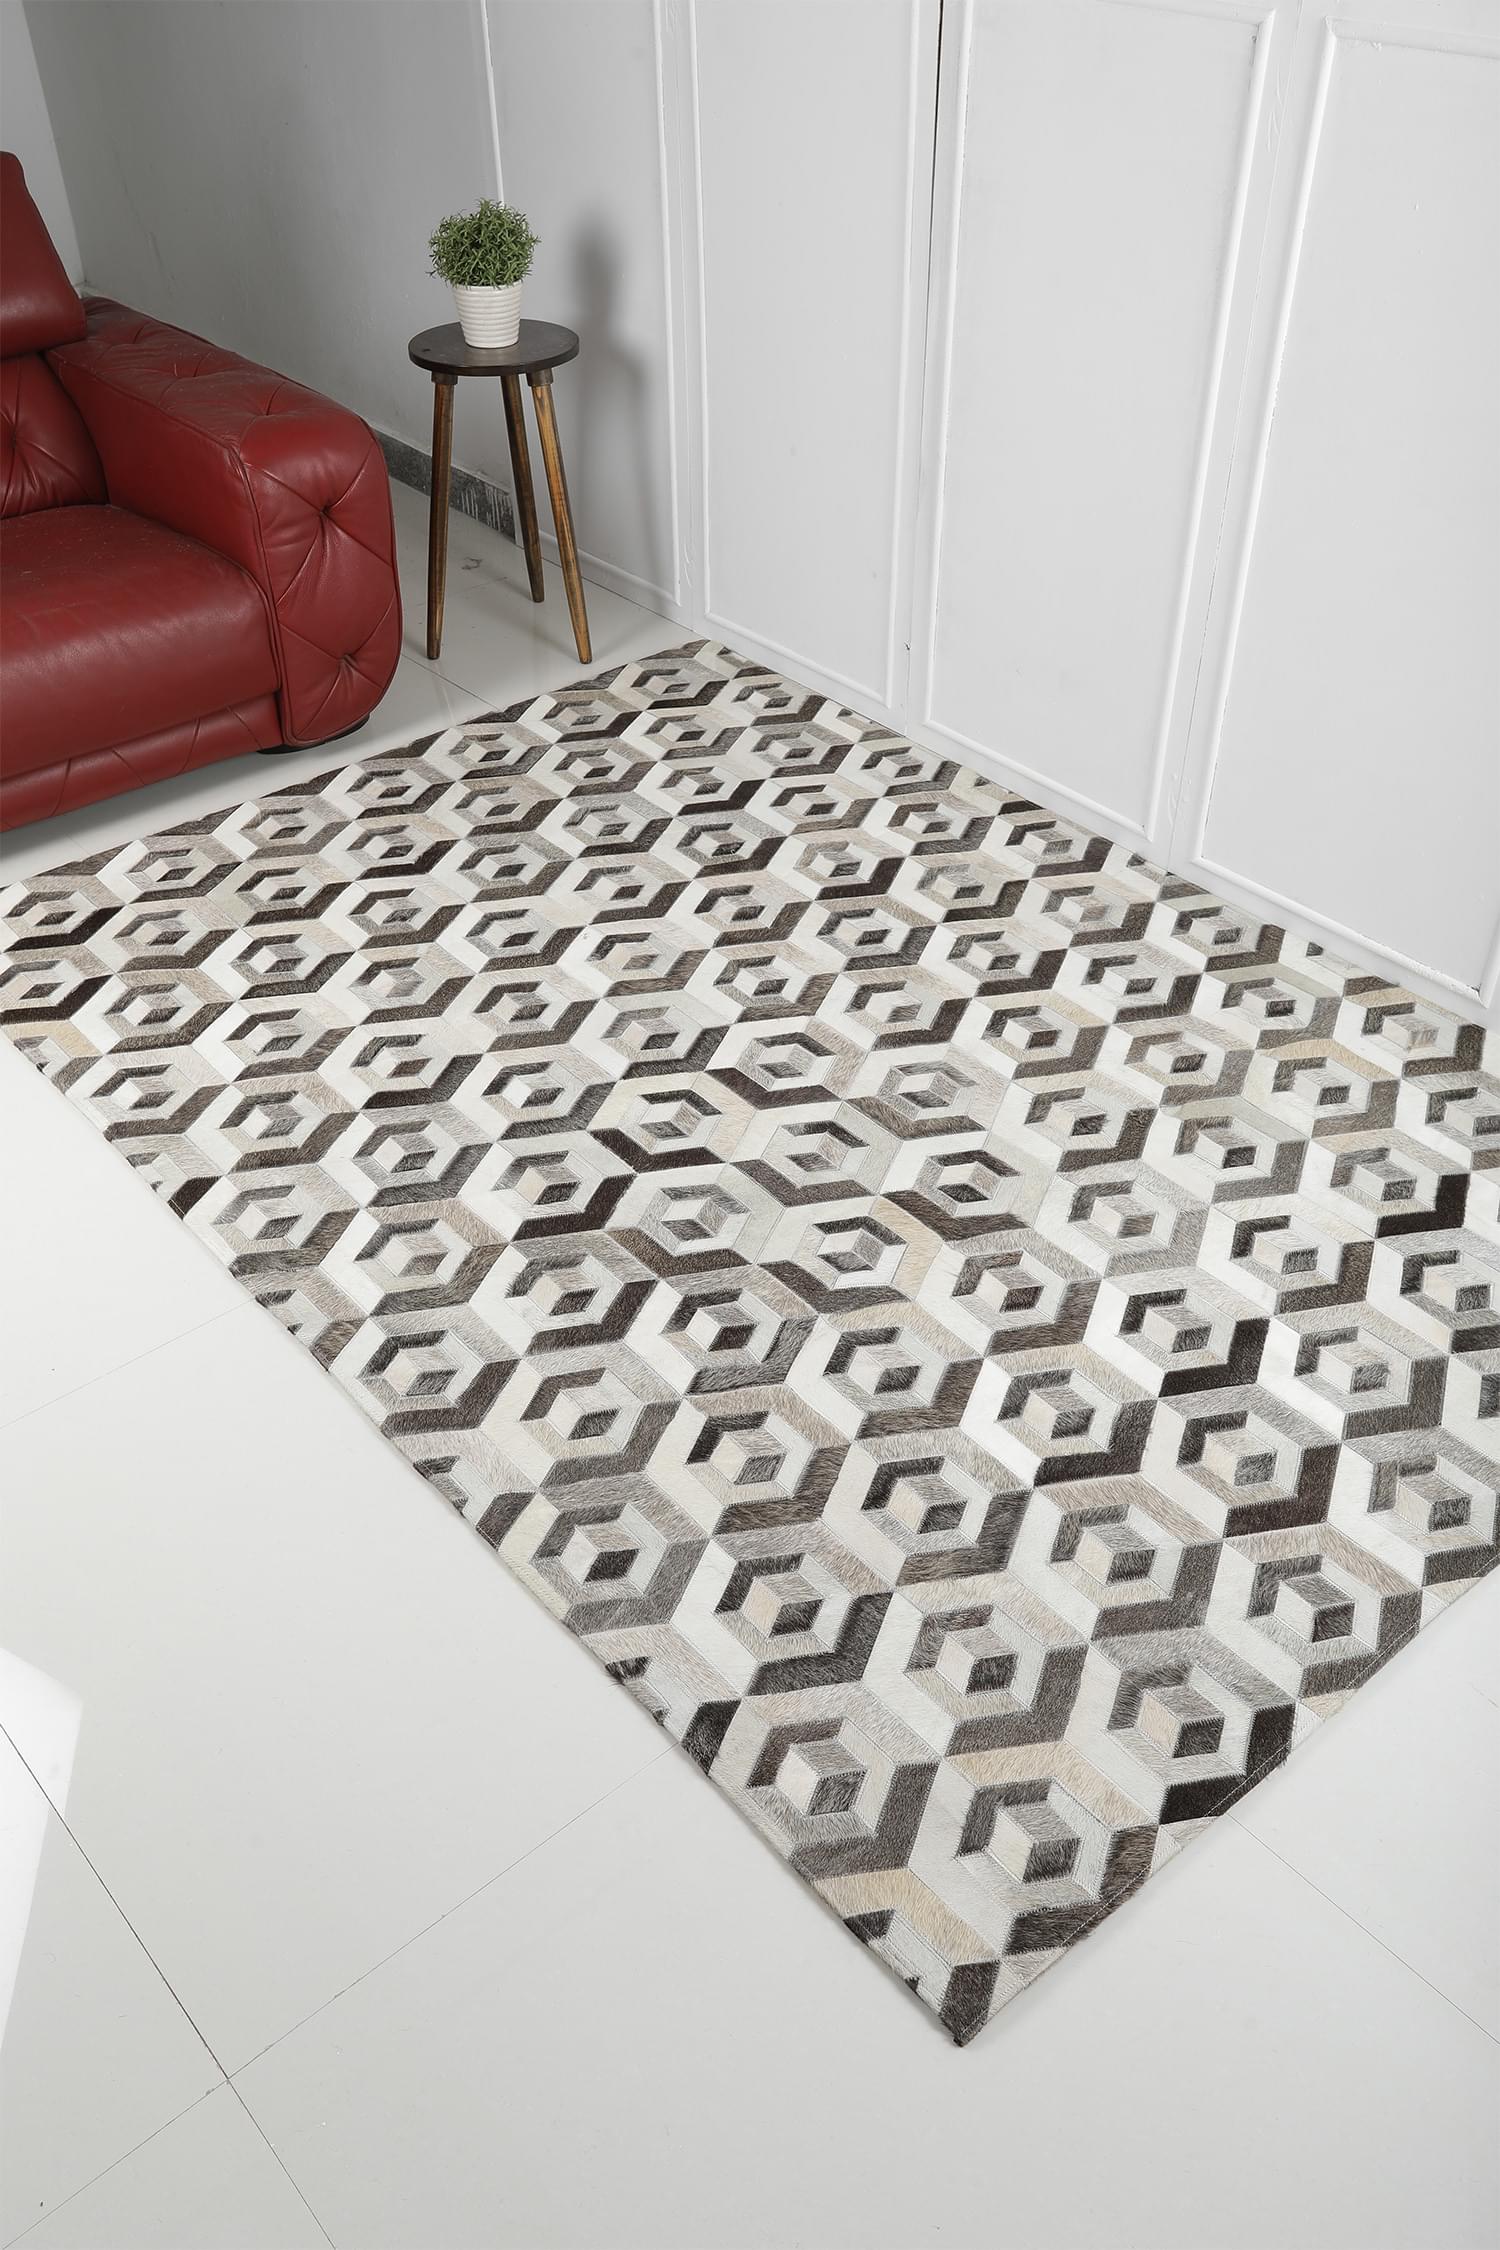 MODERN LOOM JR-0017 Leather Patchwork Rugs Product Image